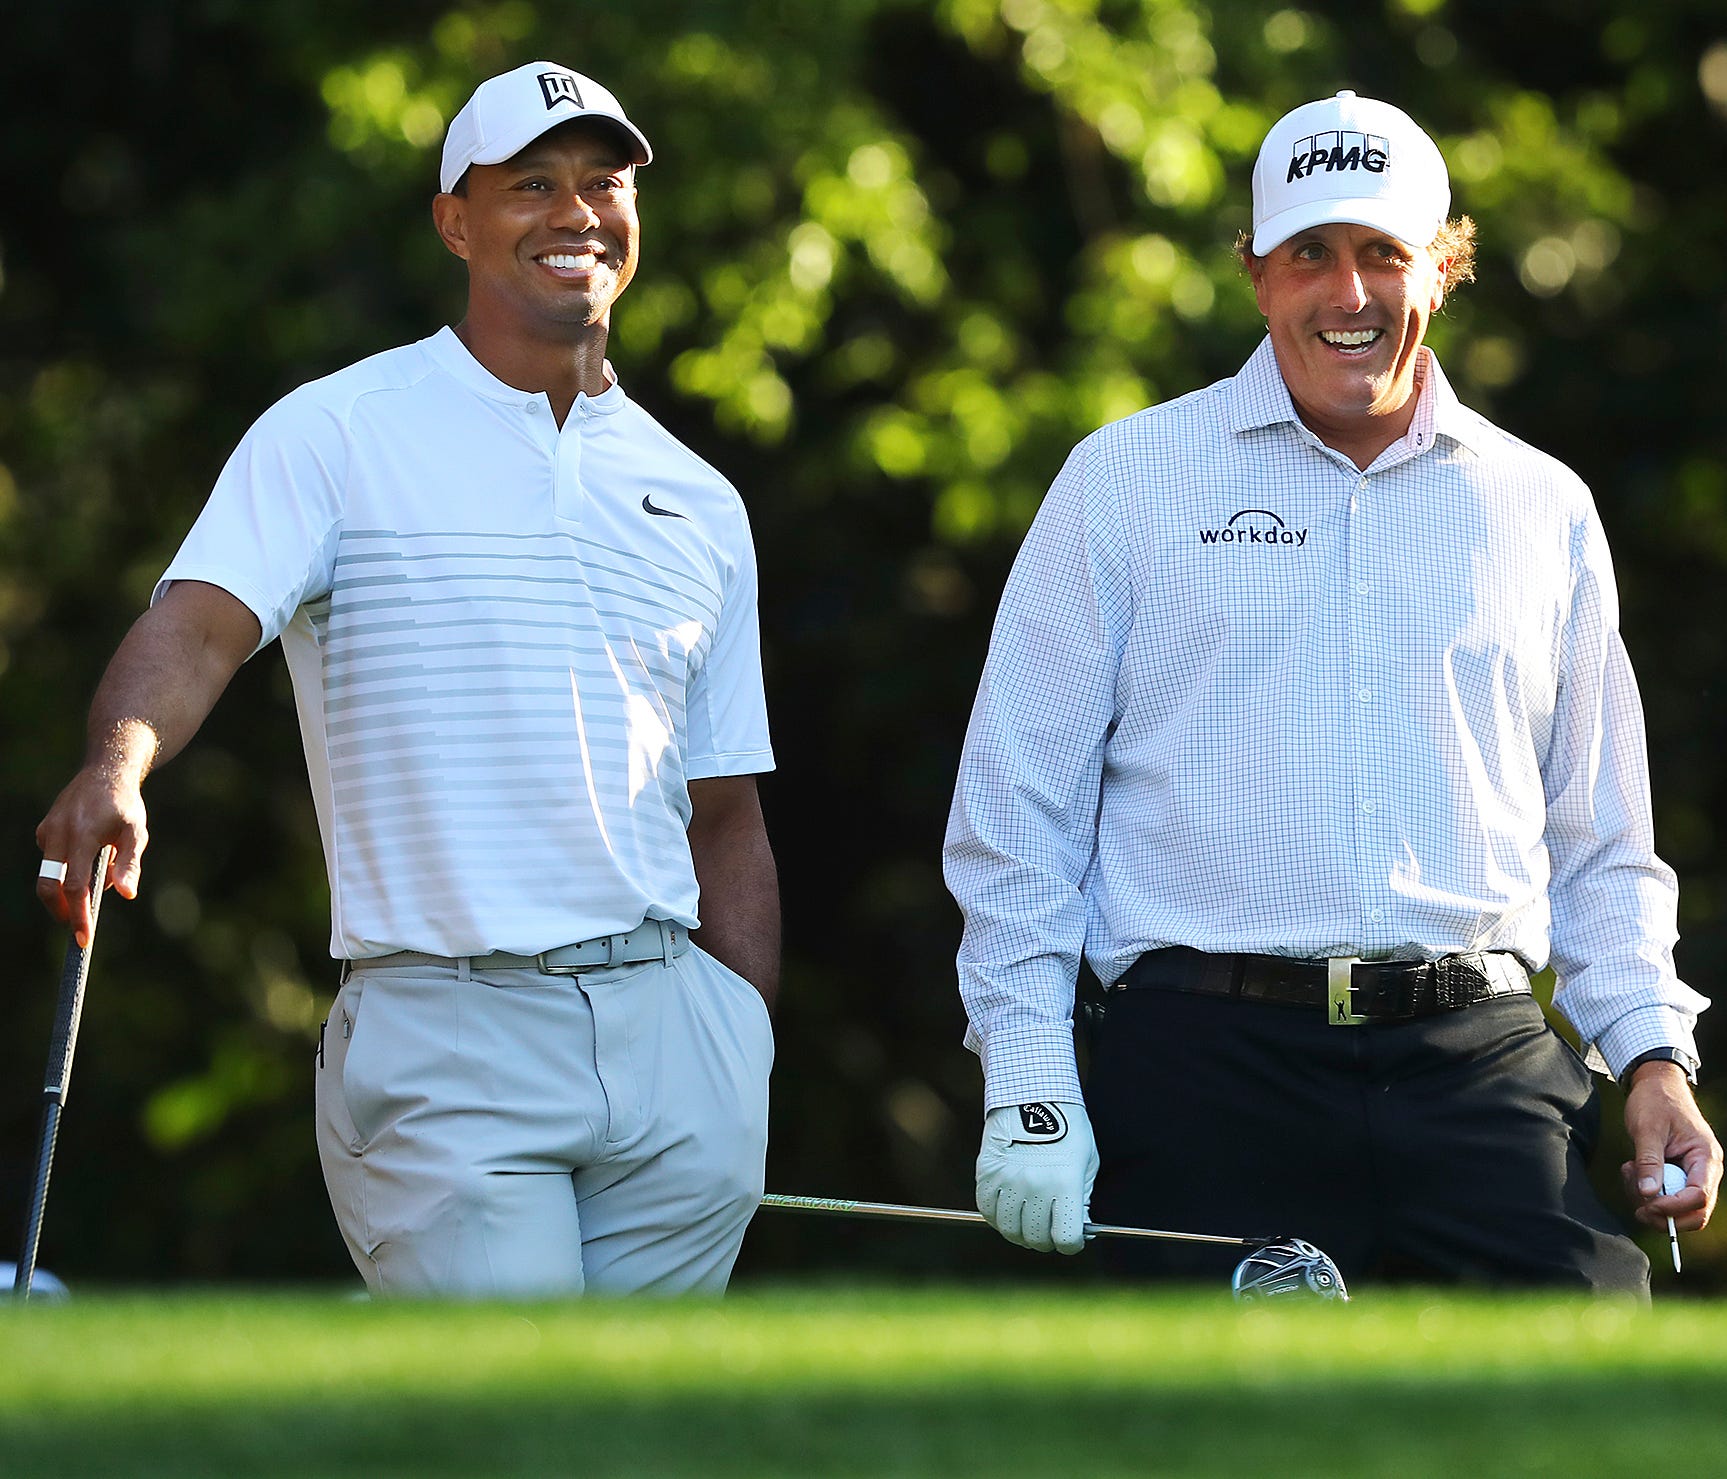 Tiger Woods, left, and Phil Mickelson share a laugh on the 11th tee box while playing a practice round for the Masters golf tournament at Augusta National Golf Club in Augusta, Ga., Tuesday, April 3, 2018. (Curtis Compton/Atlanta Journal-Constitution